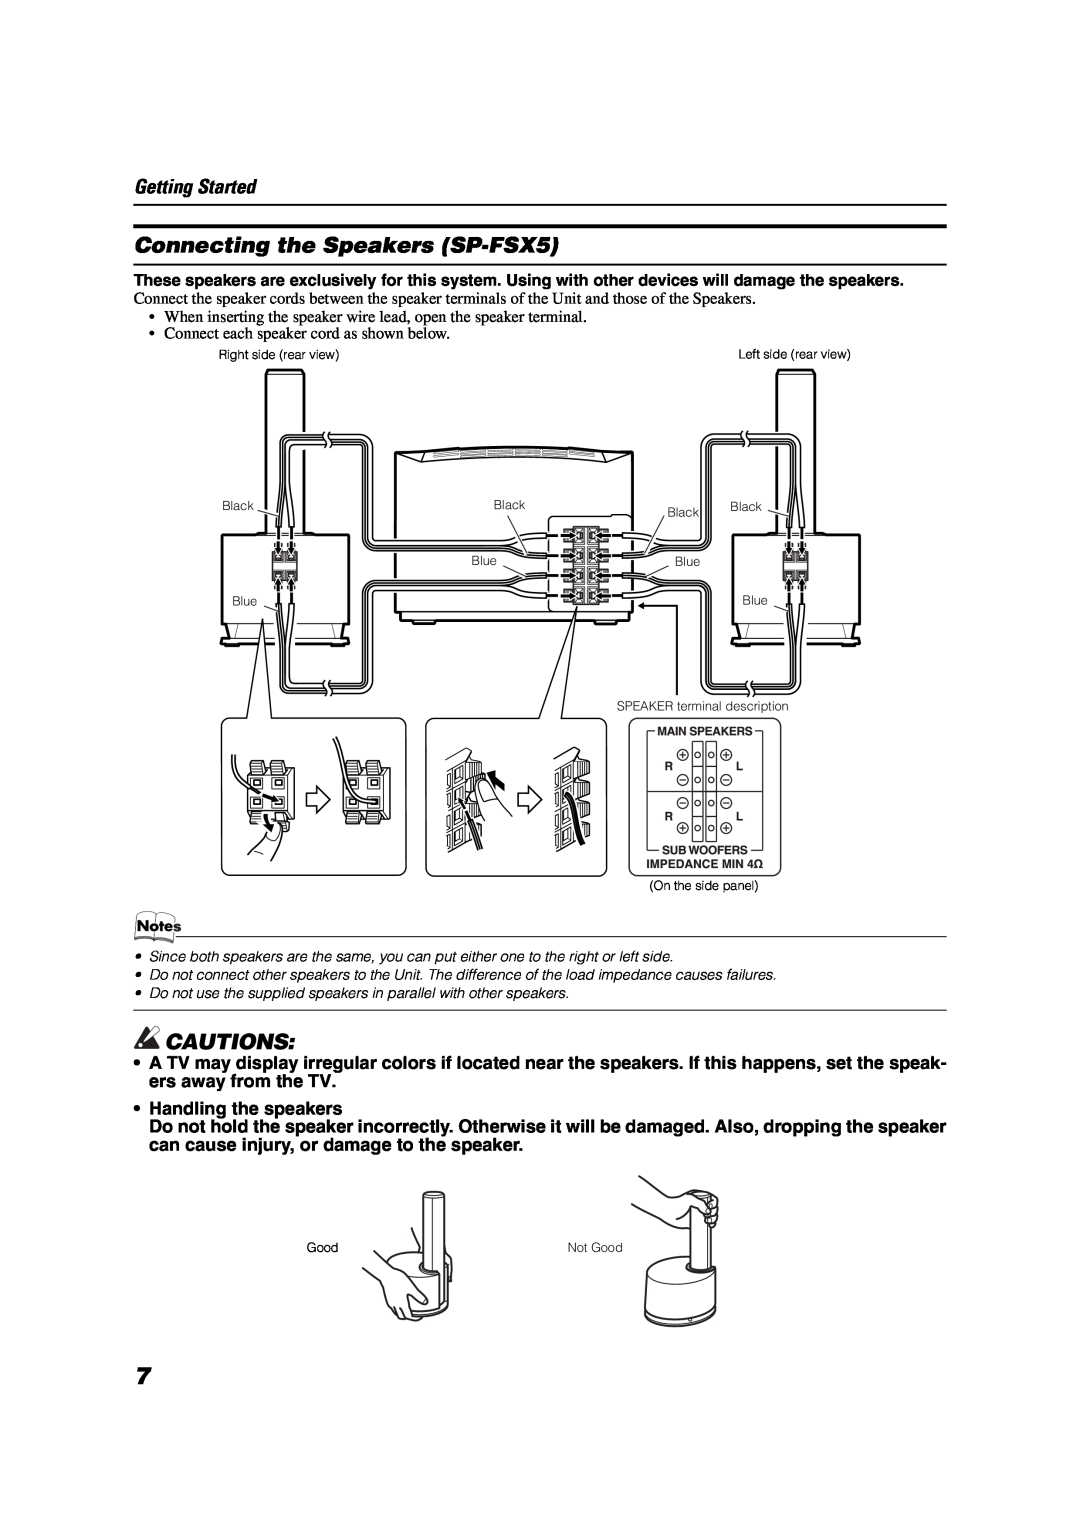 JVC LVT1041-002A, 0403MNMCREJEM manual Connecting the Speakers SP-FSX5, Cautions, Getting Started 